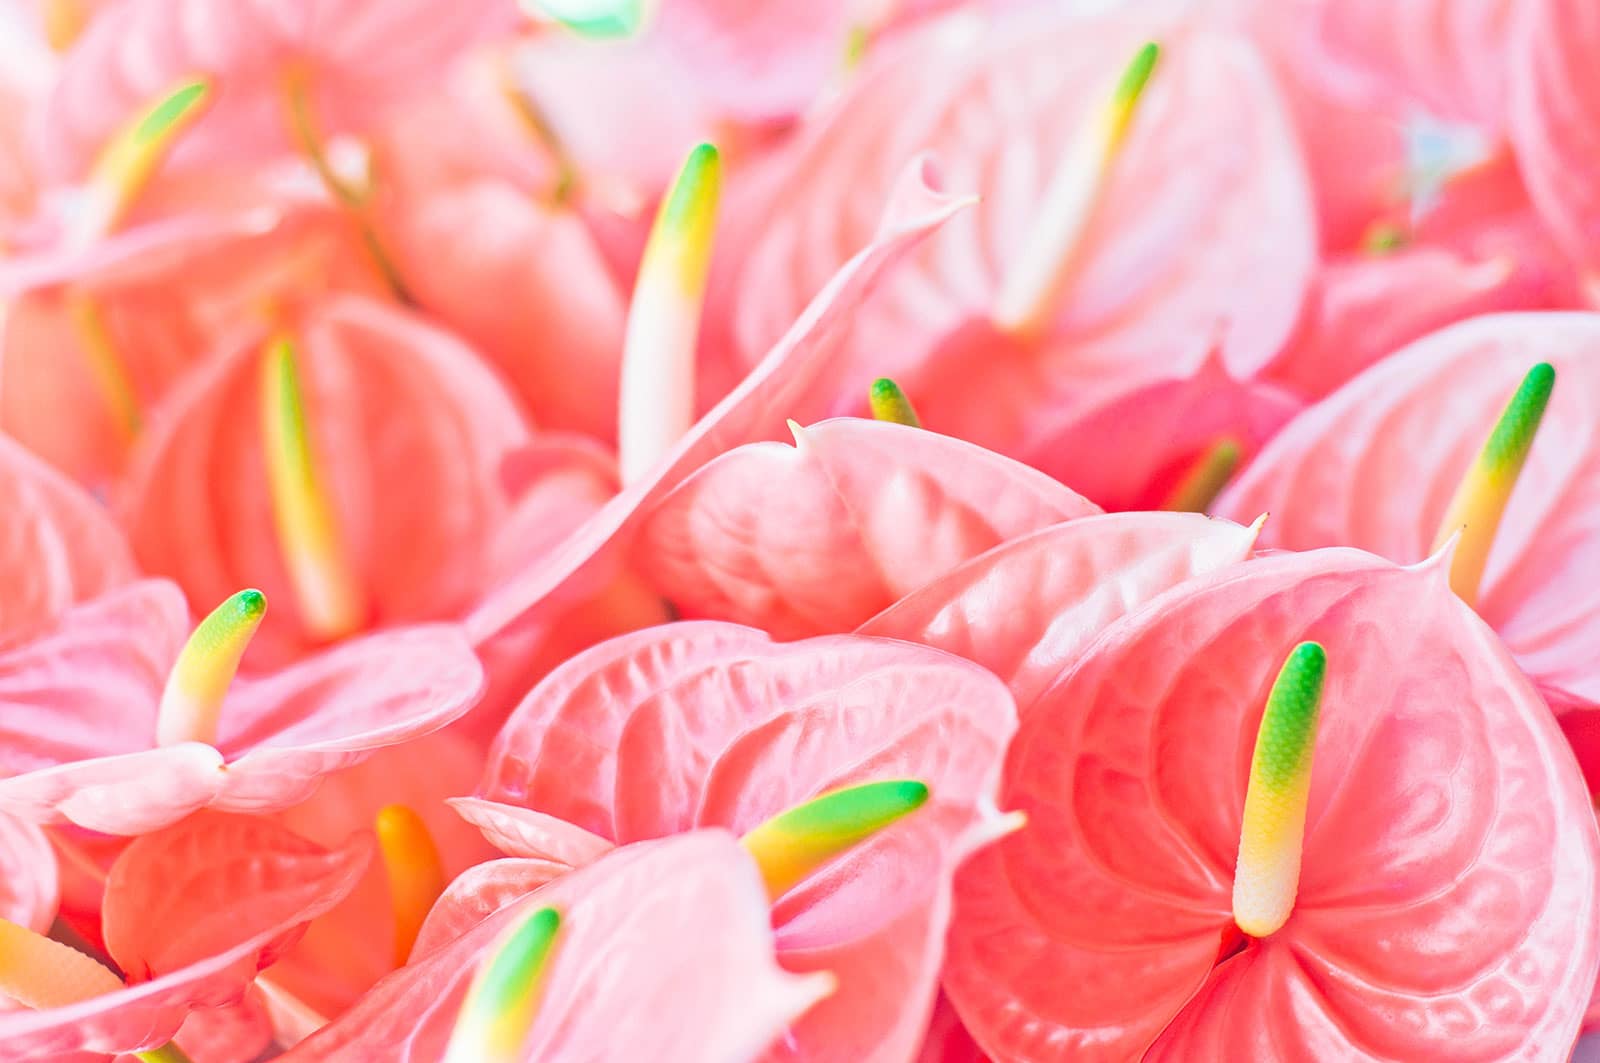 Cluster of bright pink Anthurium flowers